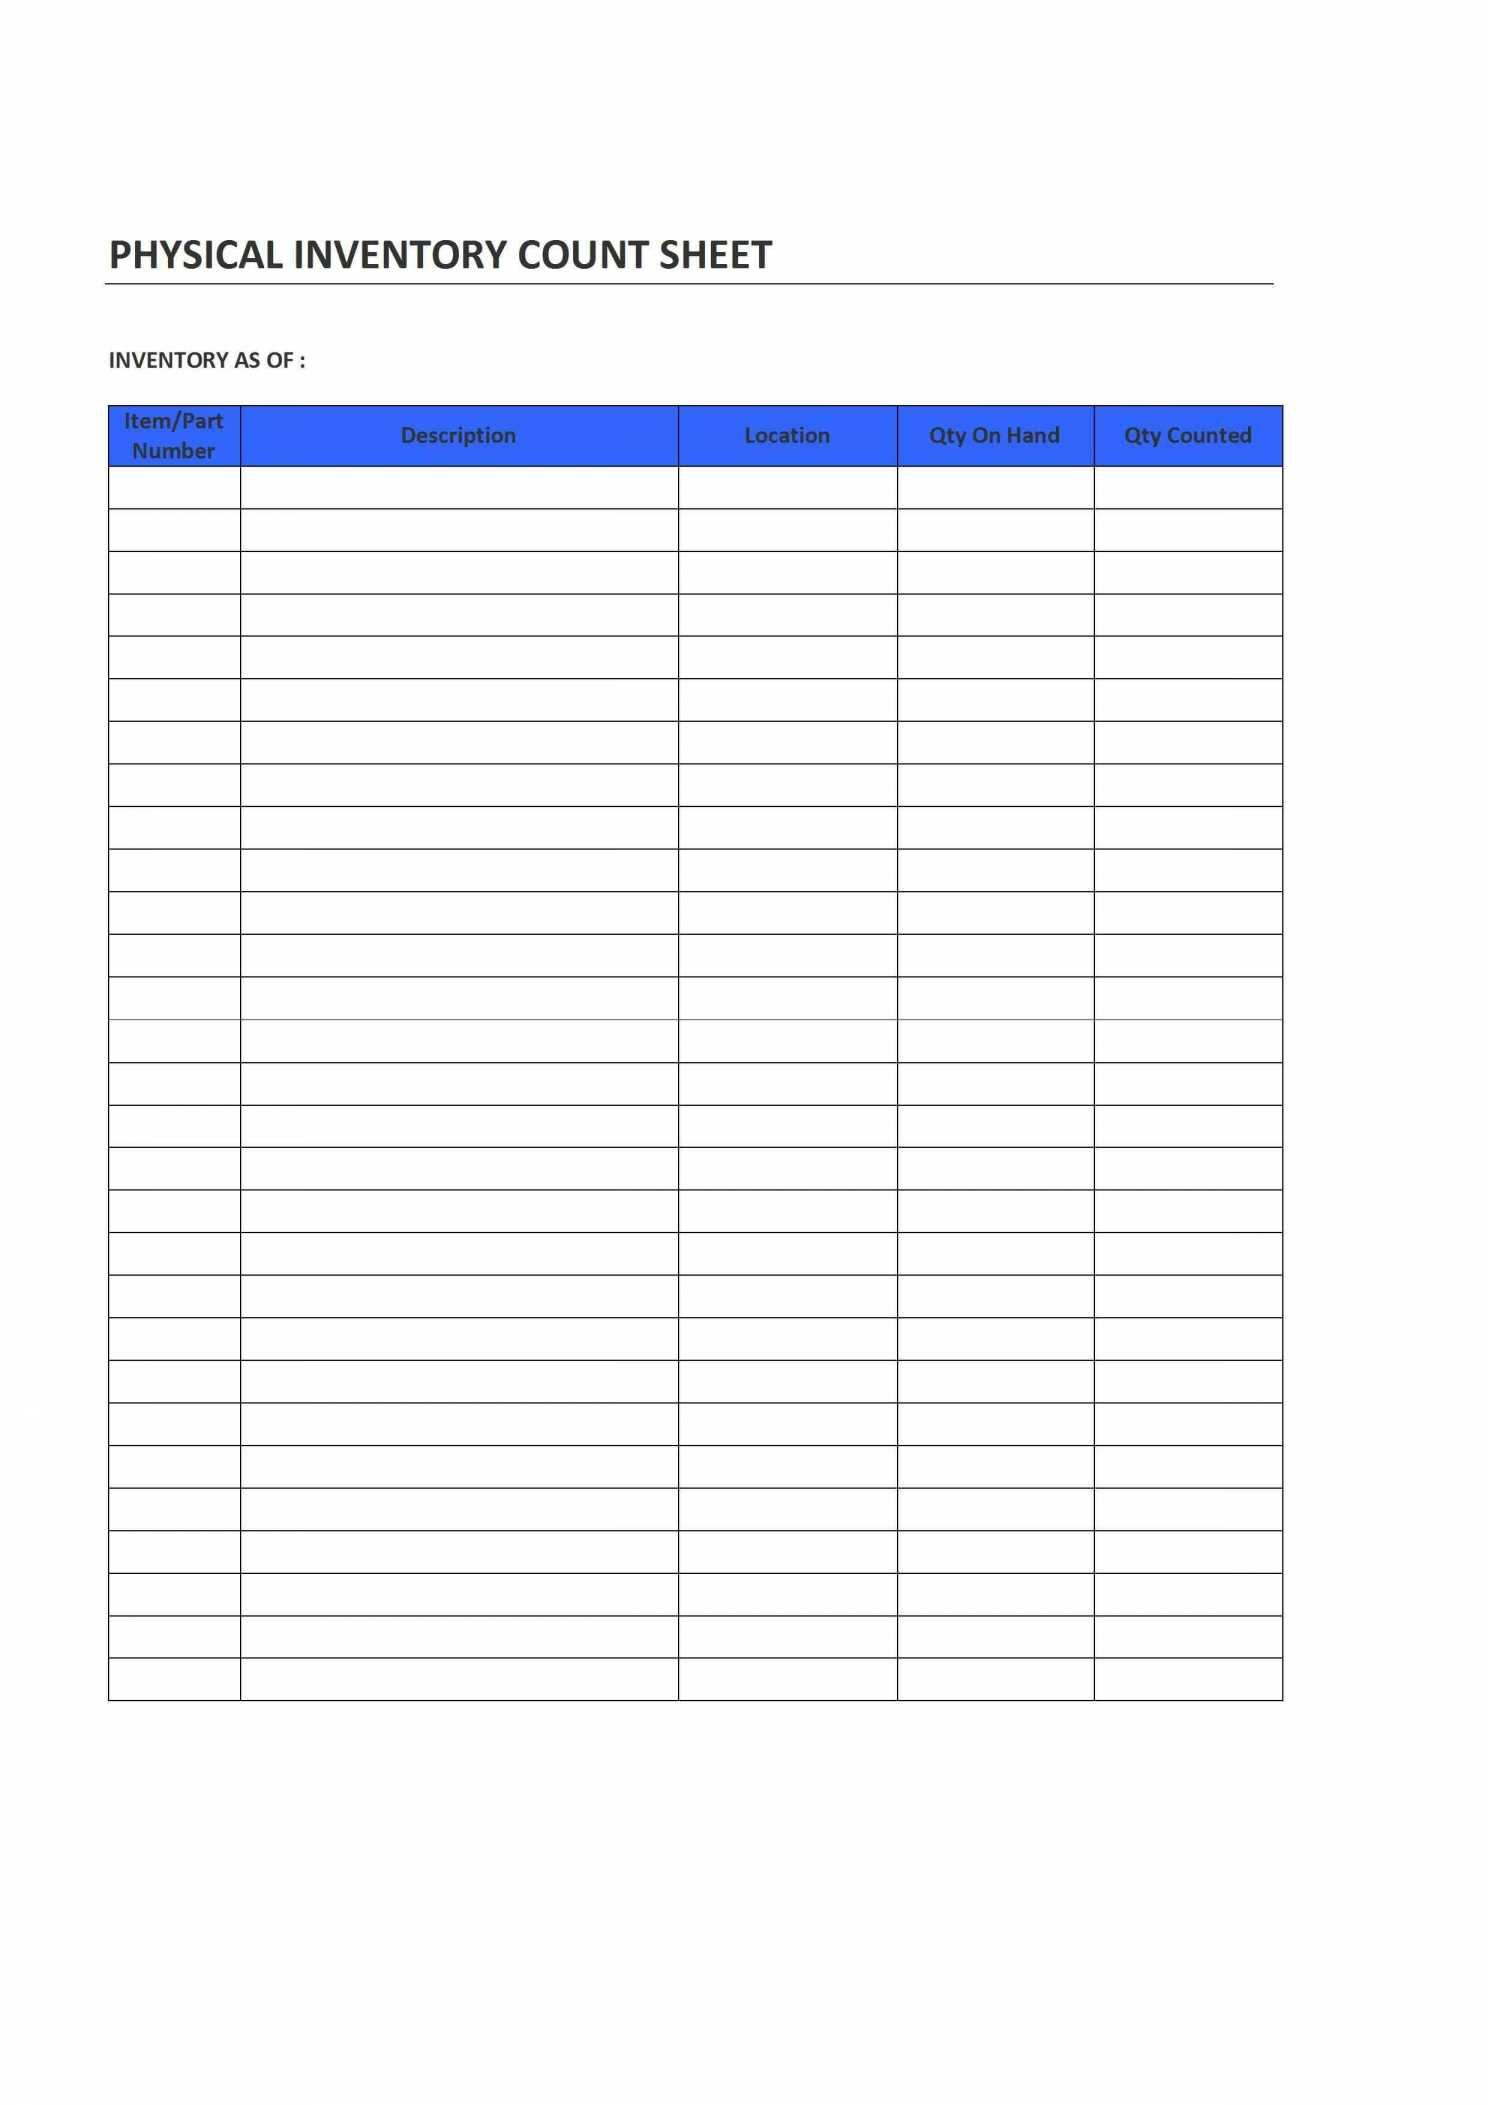 Examples Of Inventory Spreadsheets - Parttime Jobs Throughout Examples Of Inventory Spreadsheets